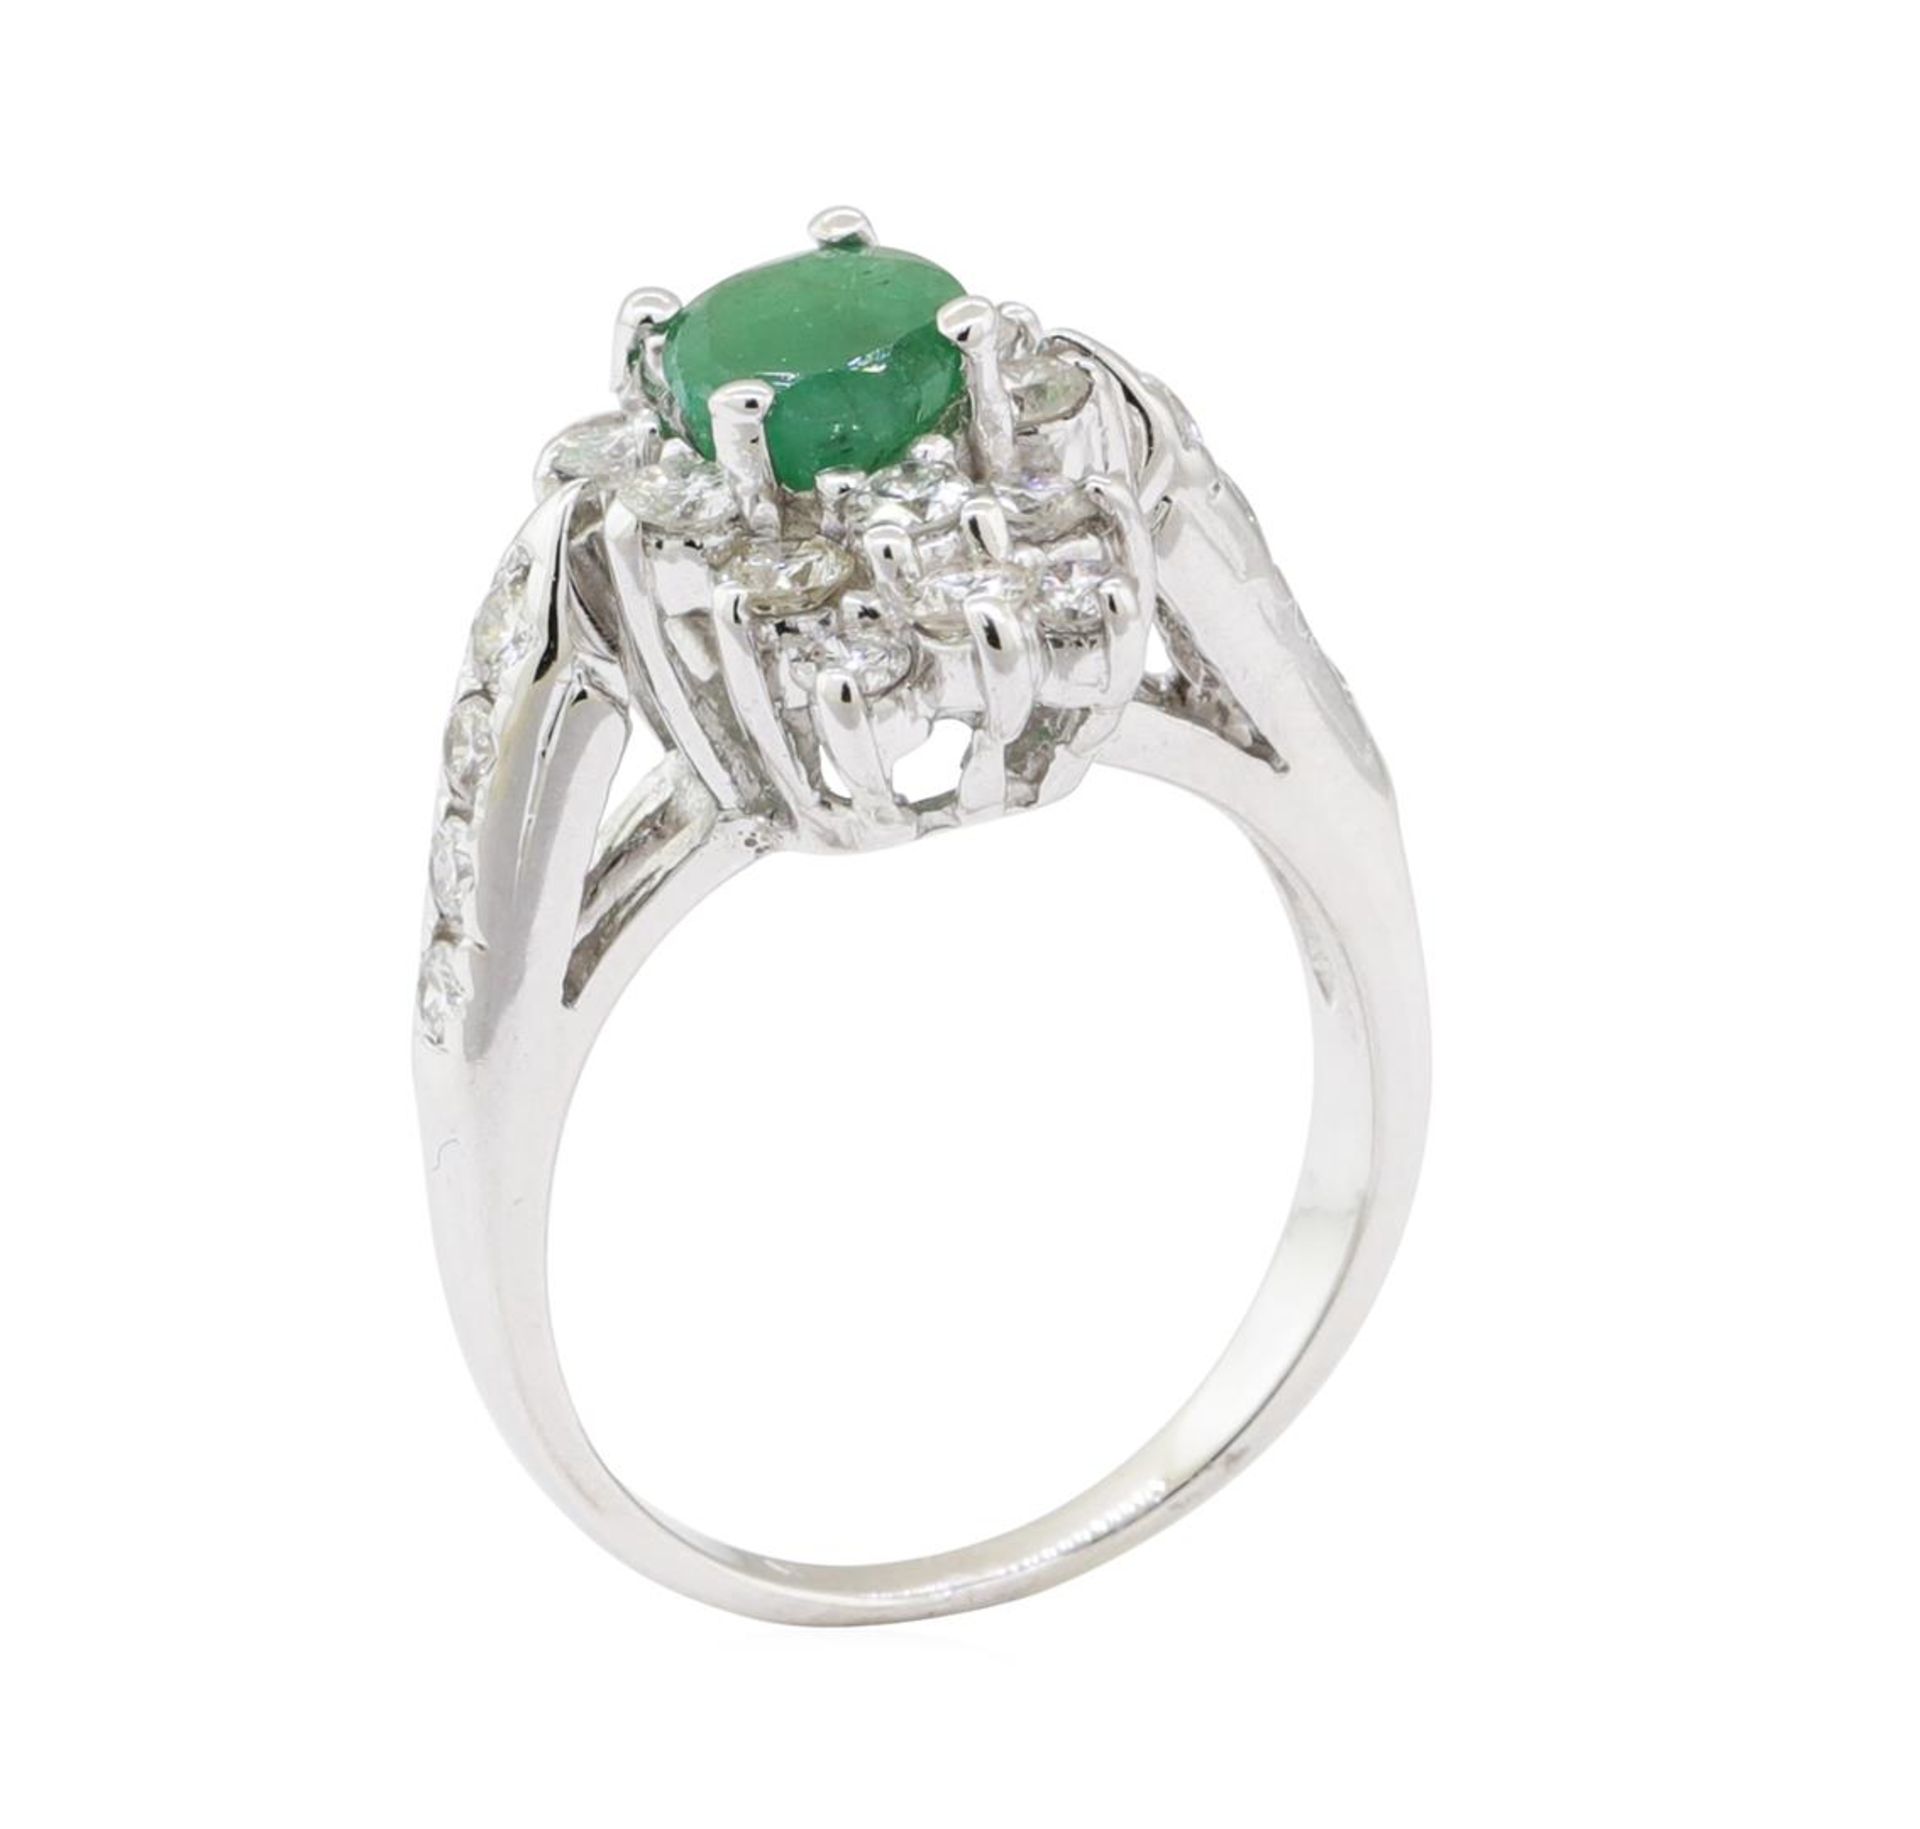 1.67 ctw Emerald and Diamond Ring - 14KT White Gold - Image 4 of 5